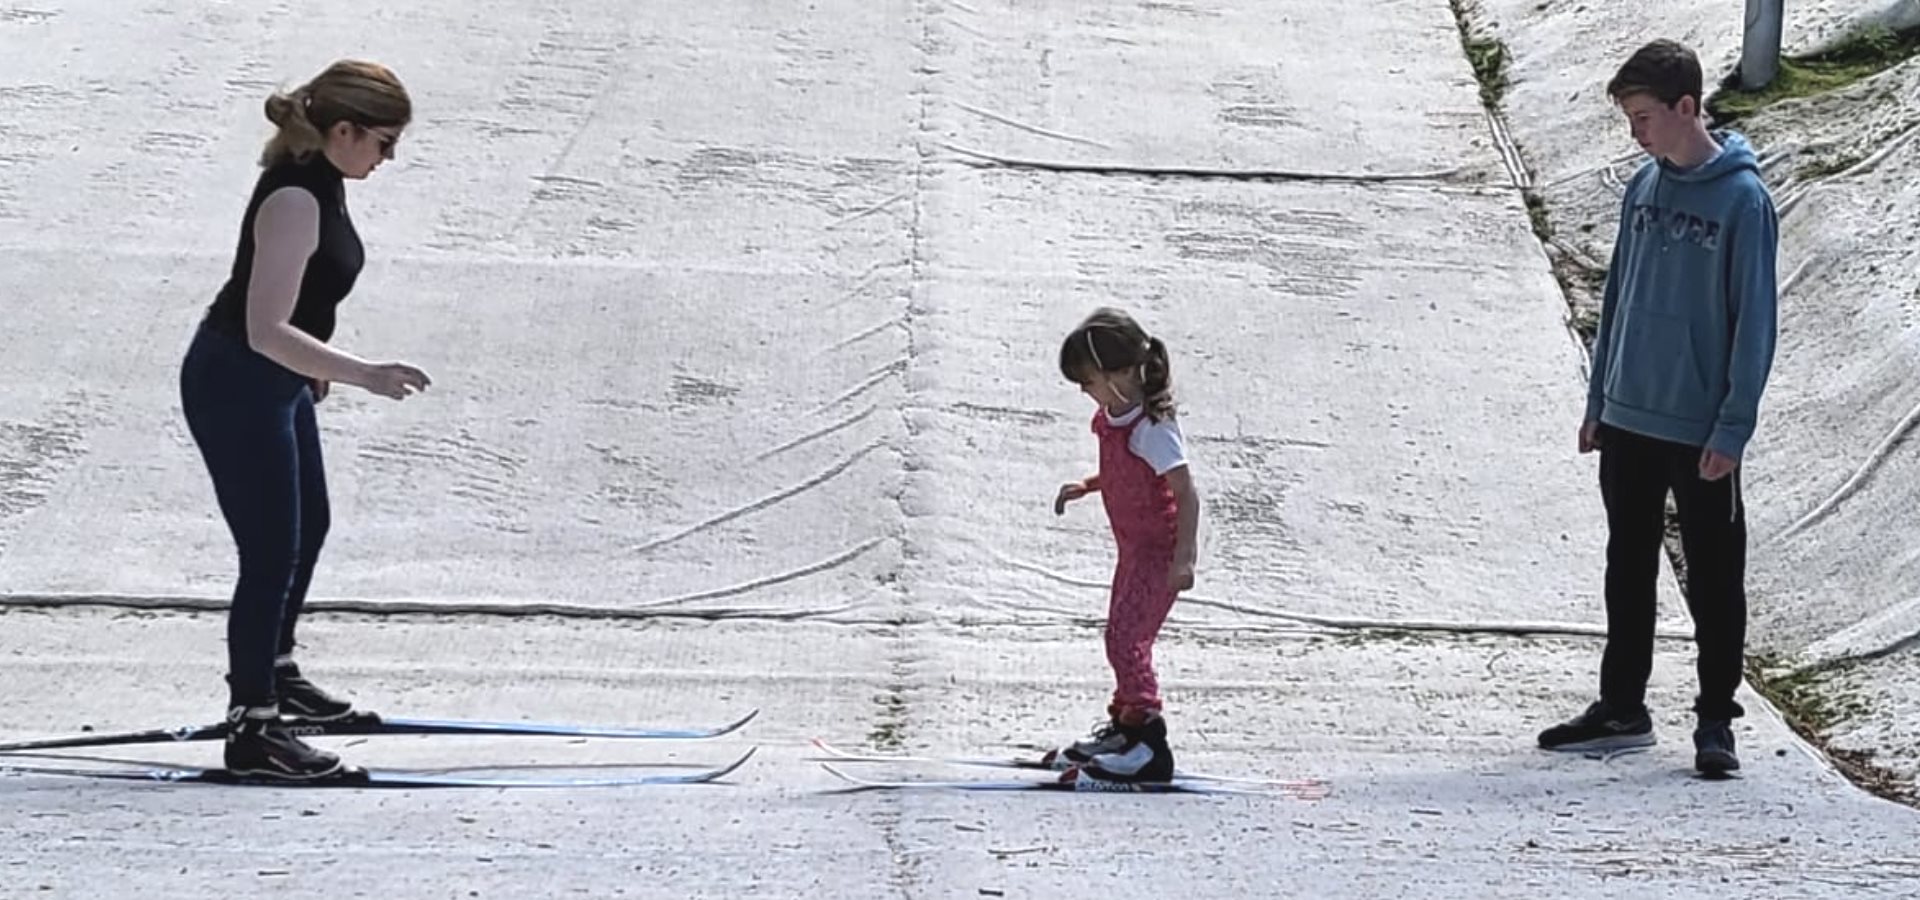 A mother and daughter enjoying a ski session on the dry ski slope